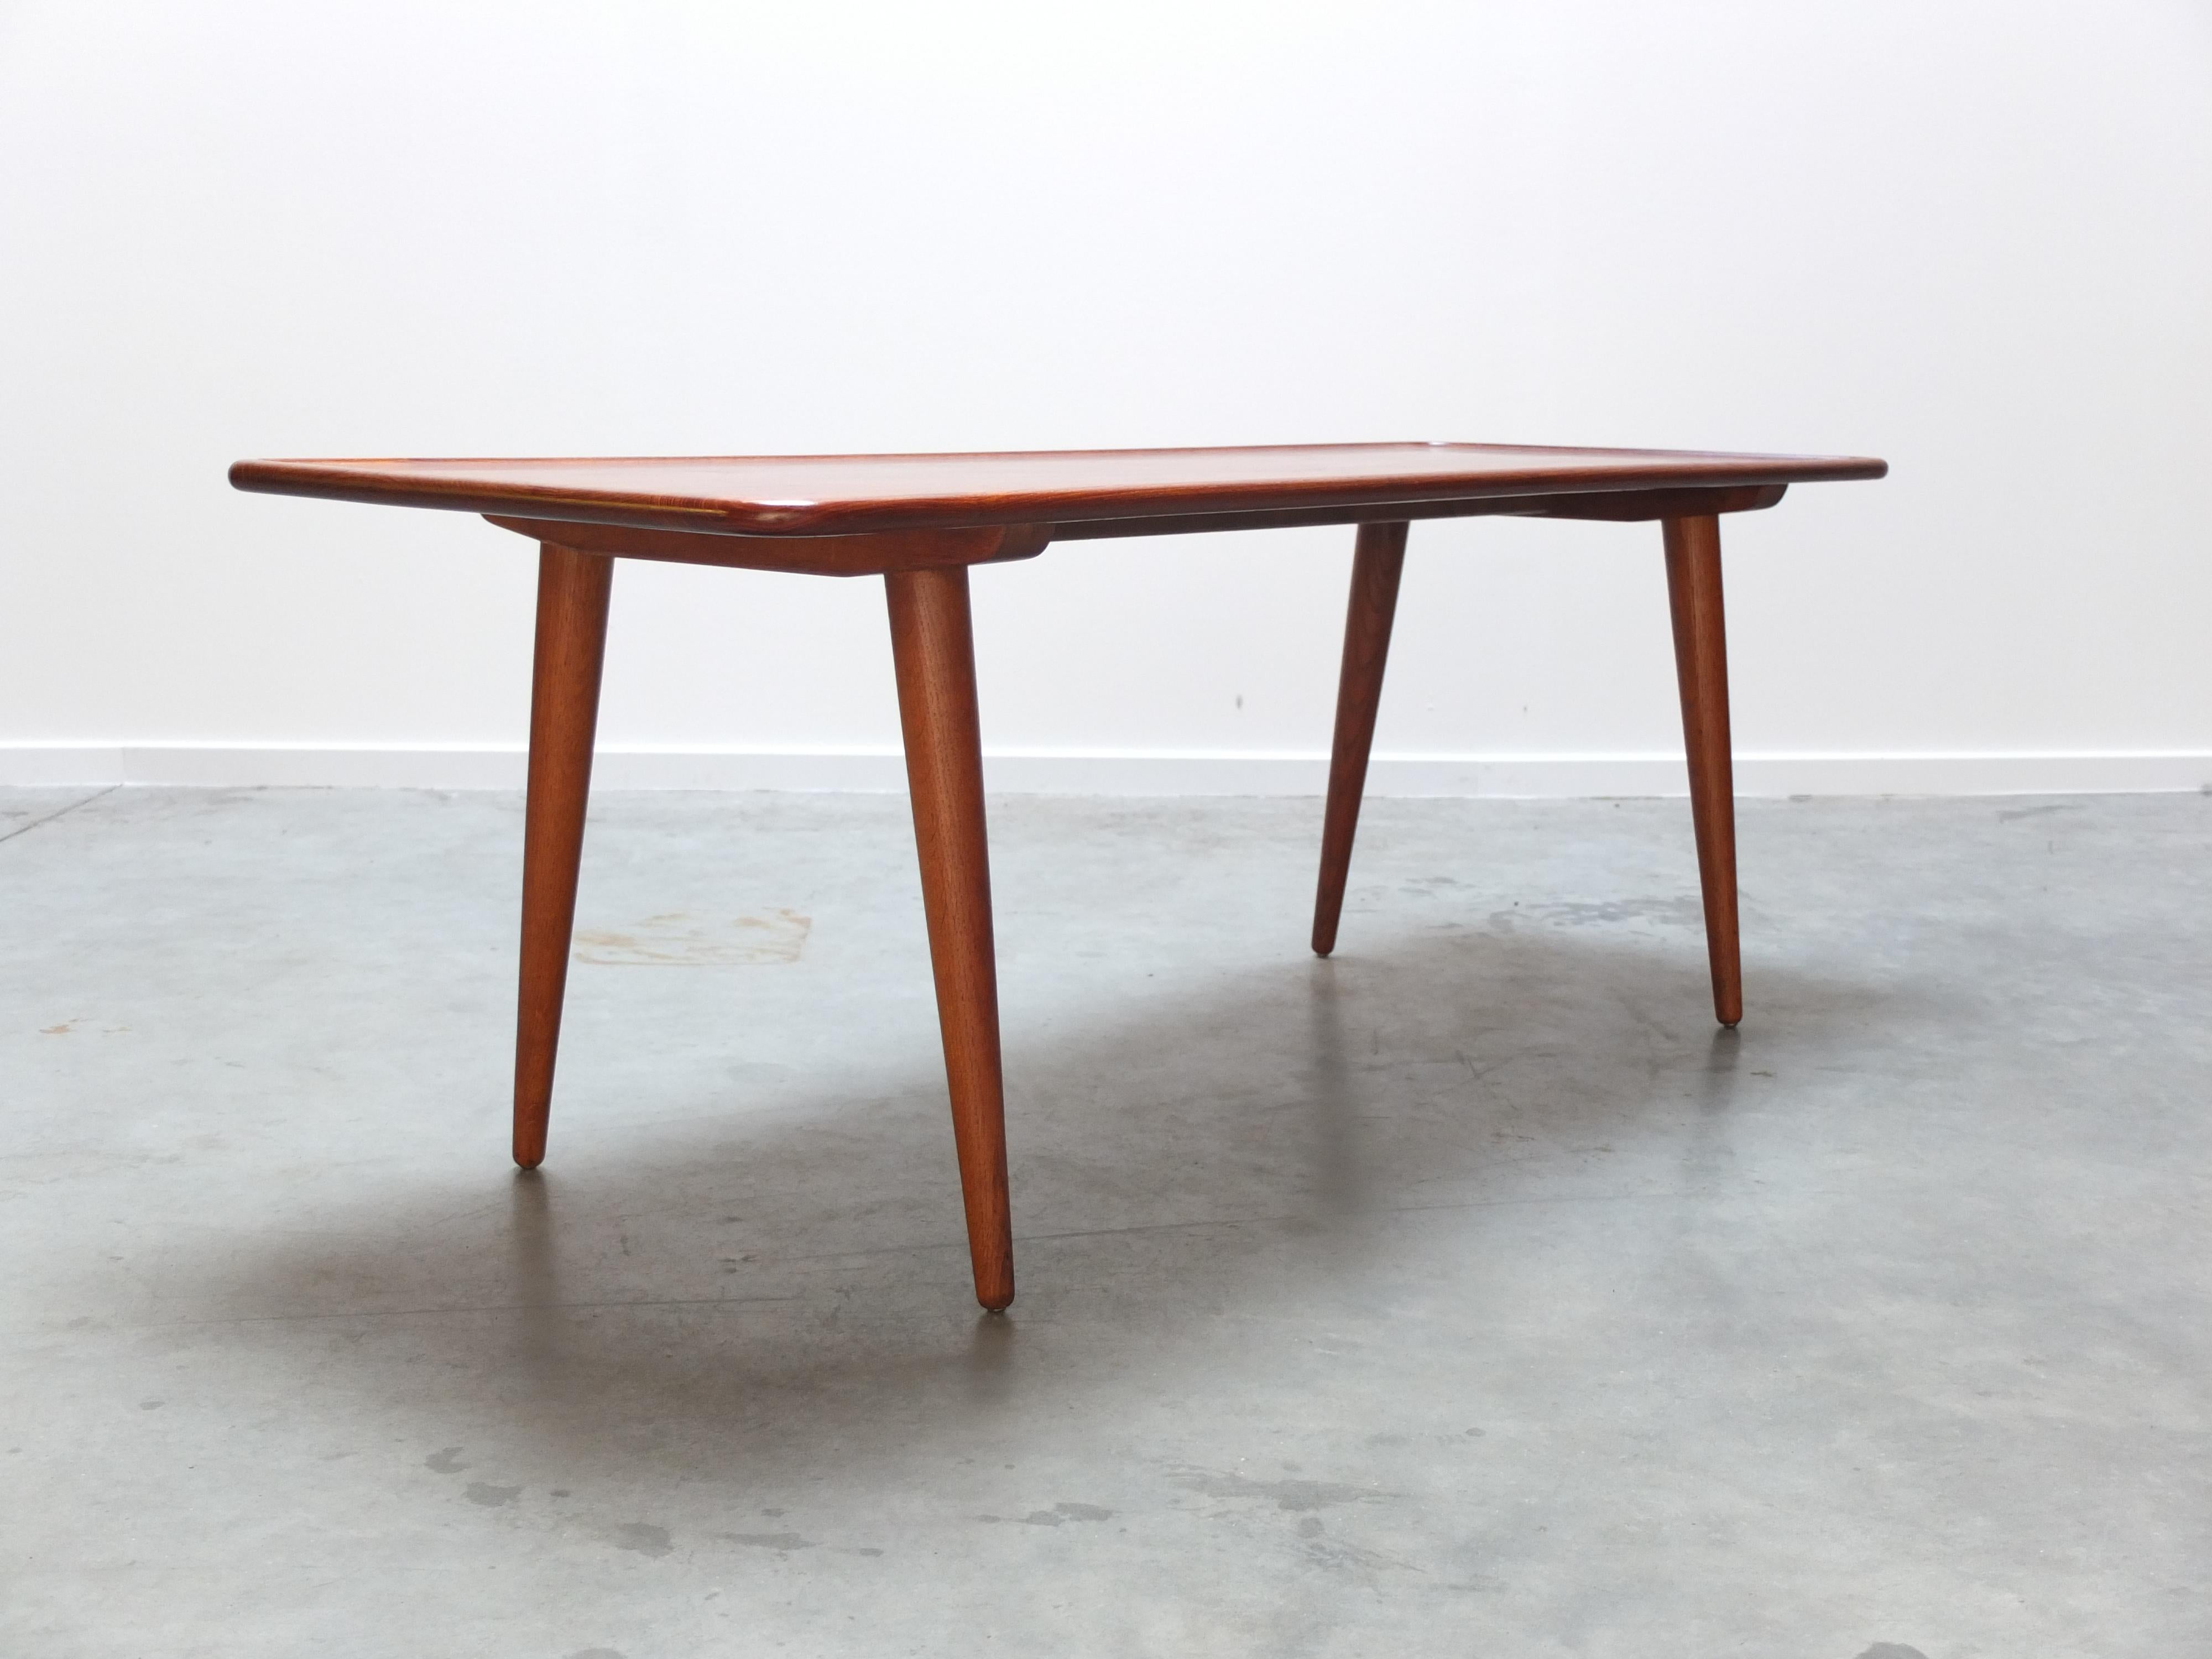 Teak & Oak 'At-11' Coffee Table by Hans Wegner for Andreas Tuck, 1950s For Sale 9